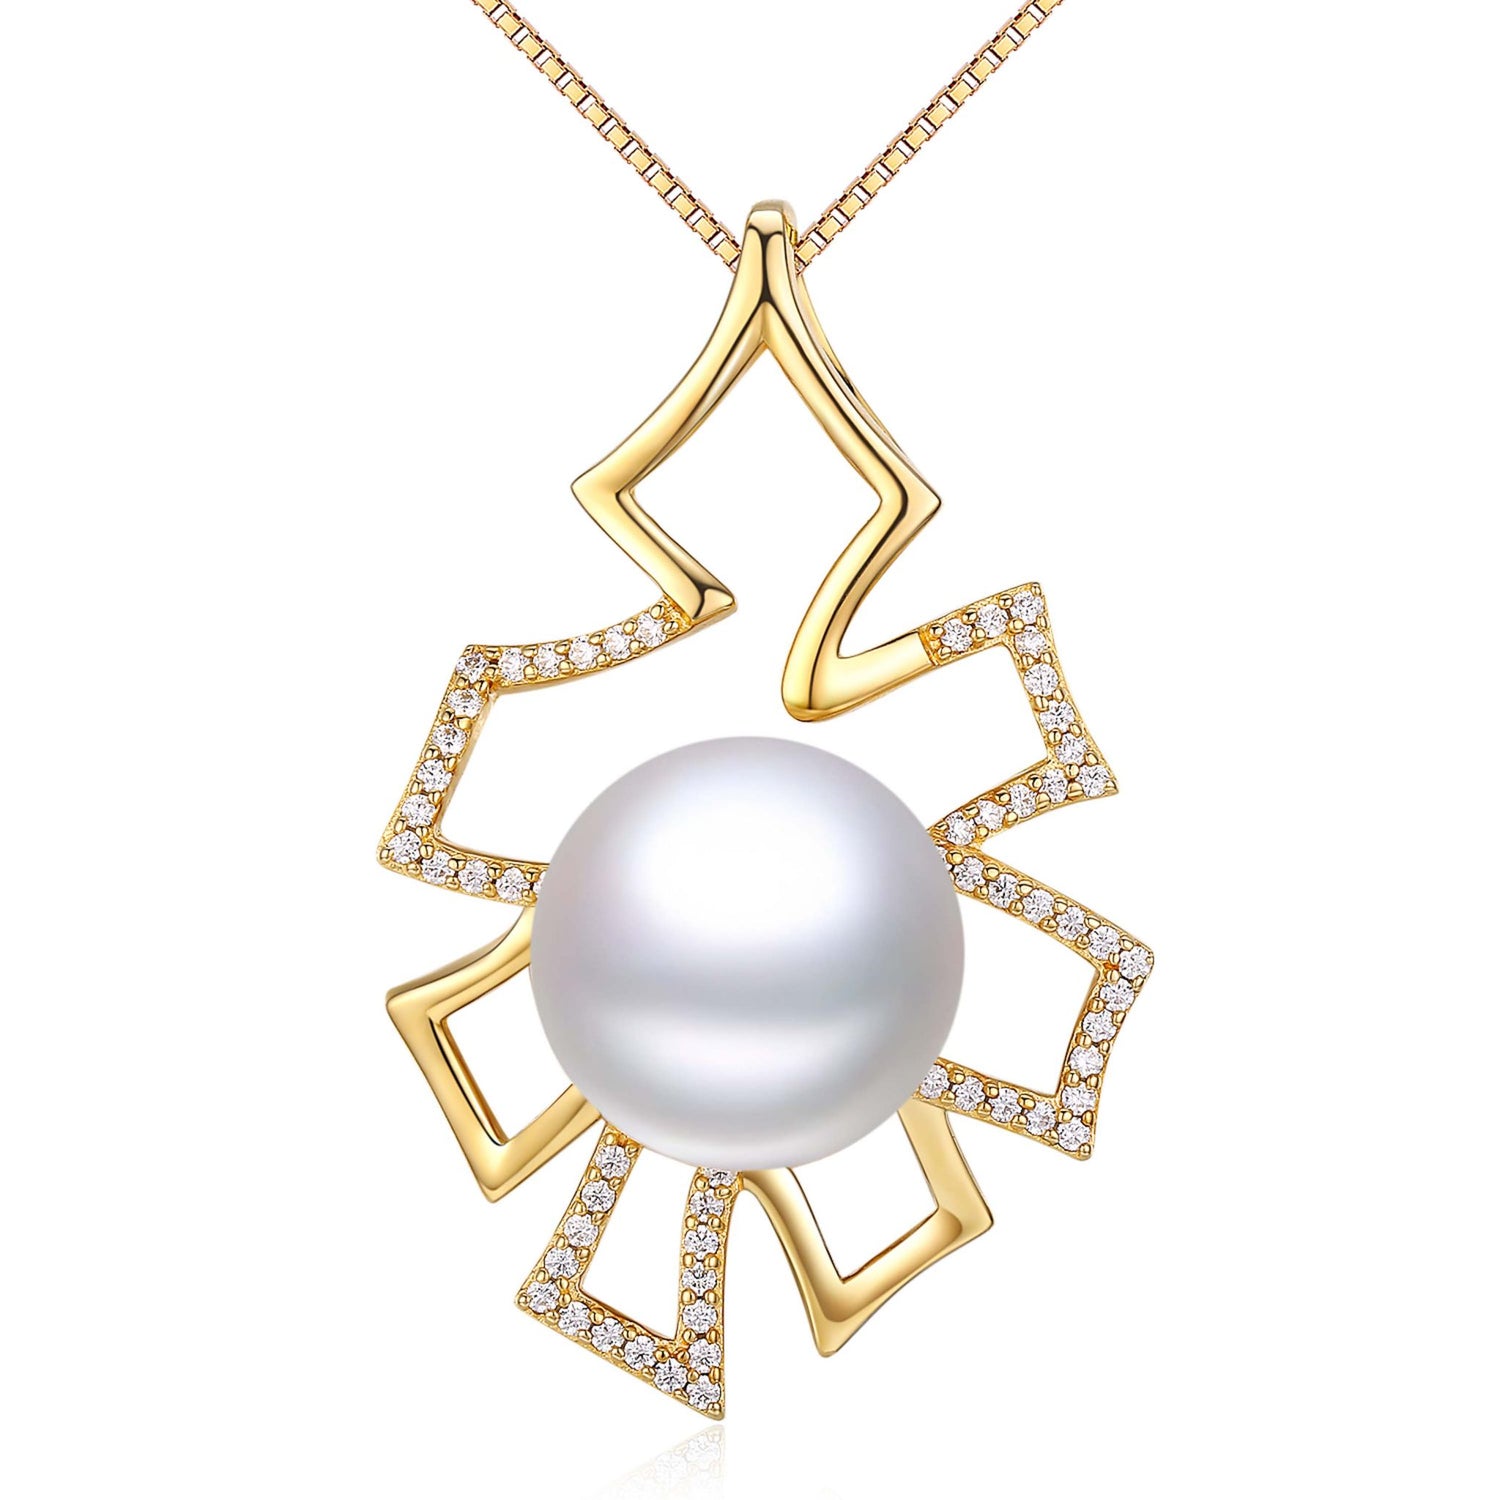 GOLDEN TREE OF LIFE EDISON PEARL NECKLACE - Timeless Pearl